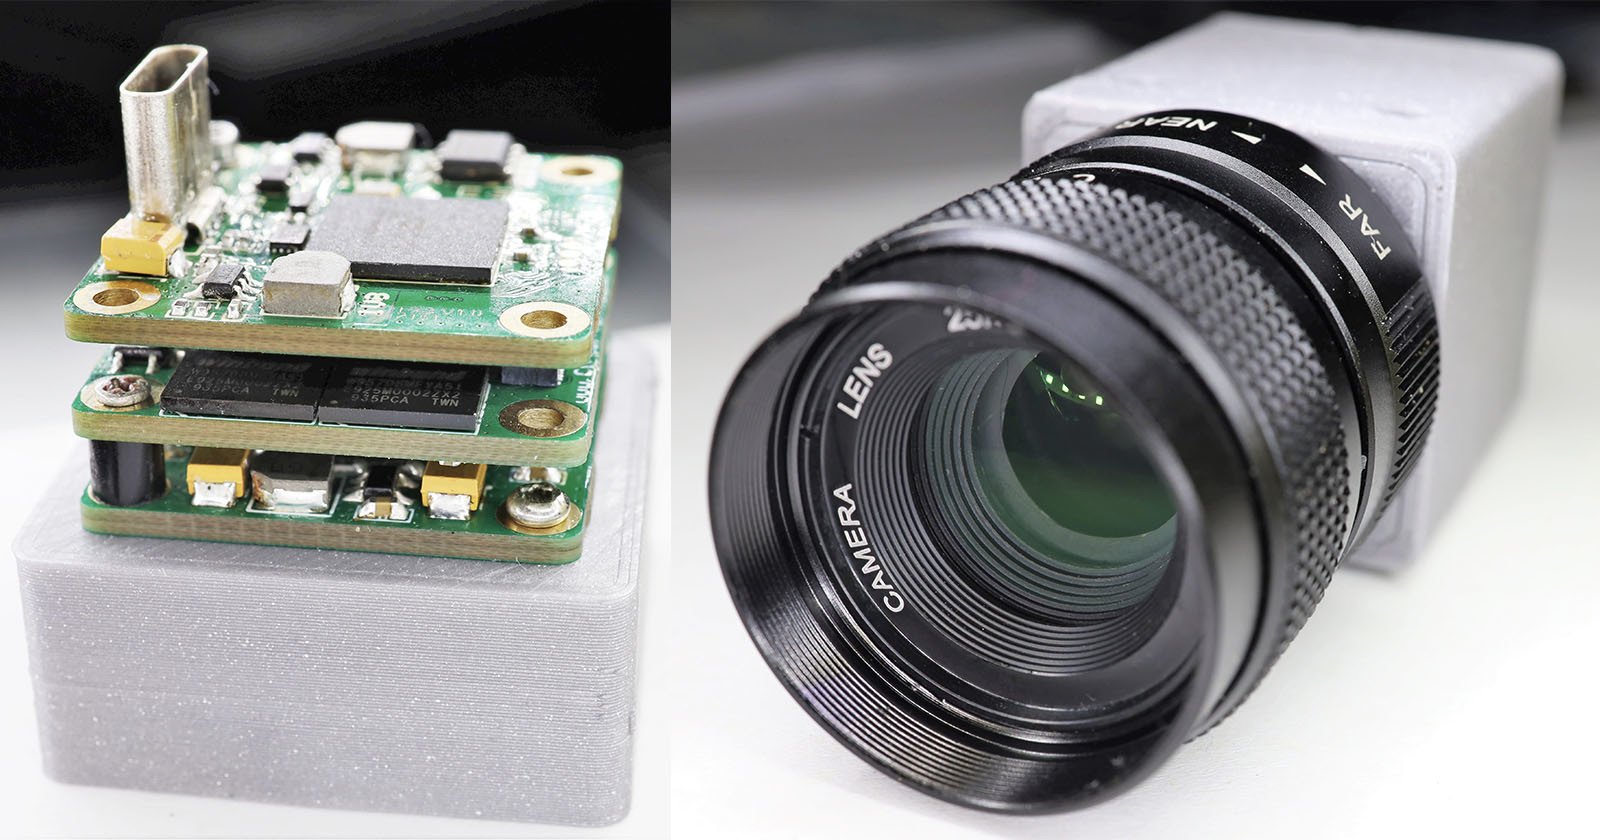 3D Print Your Own Camera with an Interchangeable Sensor and Lens